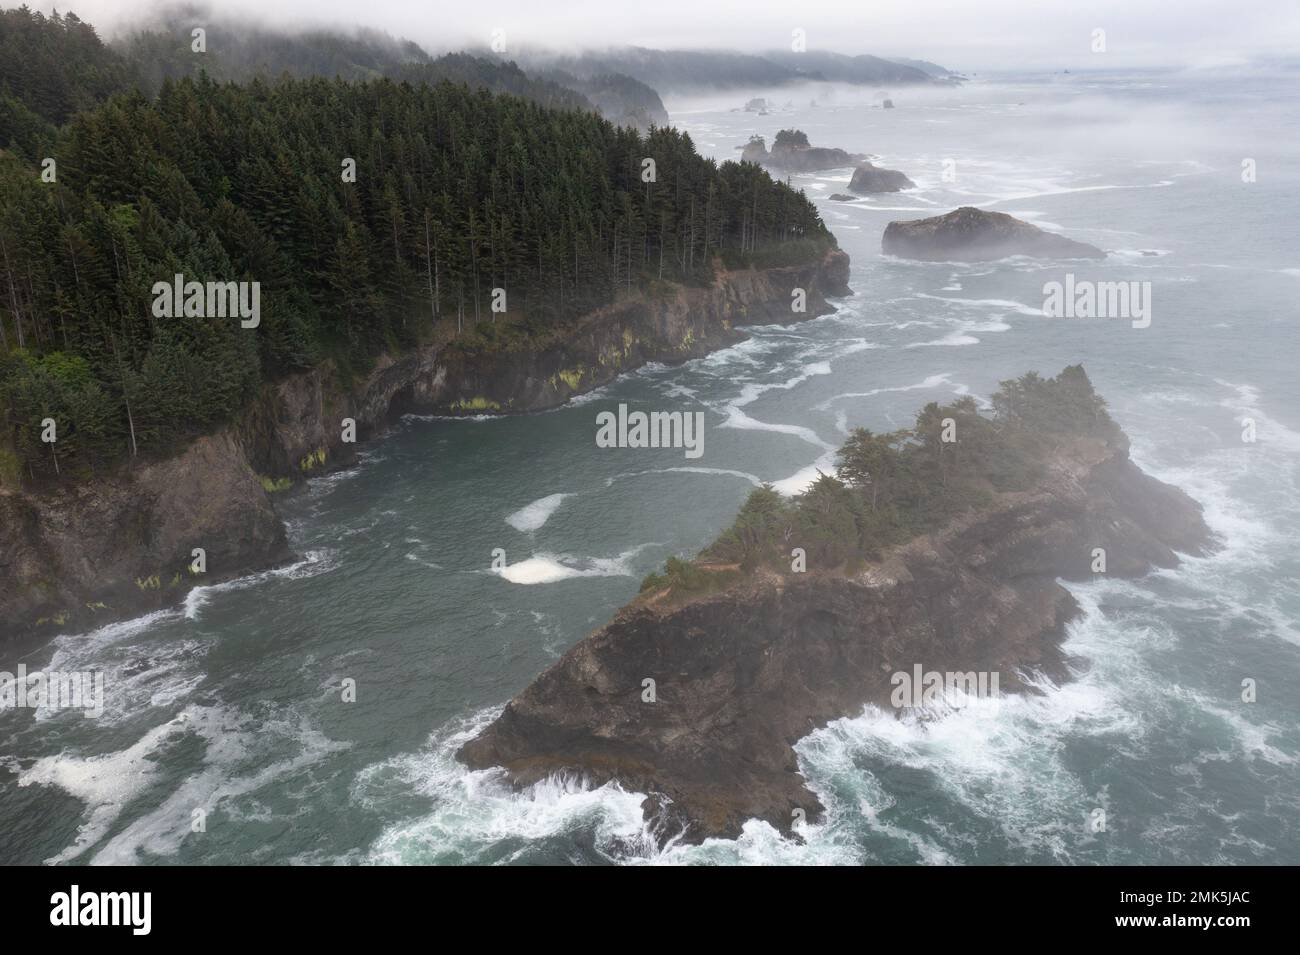 Fog drifts over the beautiful coastline of southern Oregon near Brookings. This part of the Pacific Northwest is known for its outdoor scenery. Stock Photo